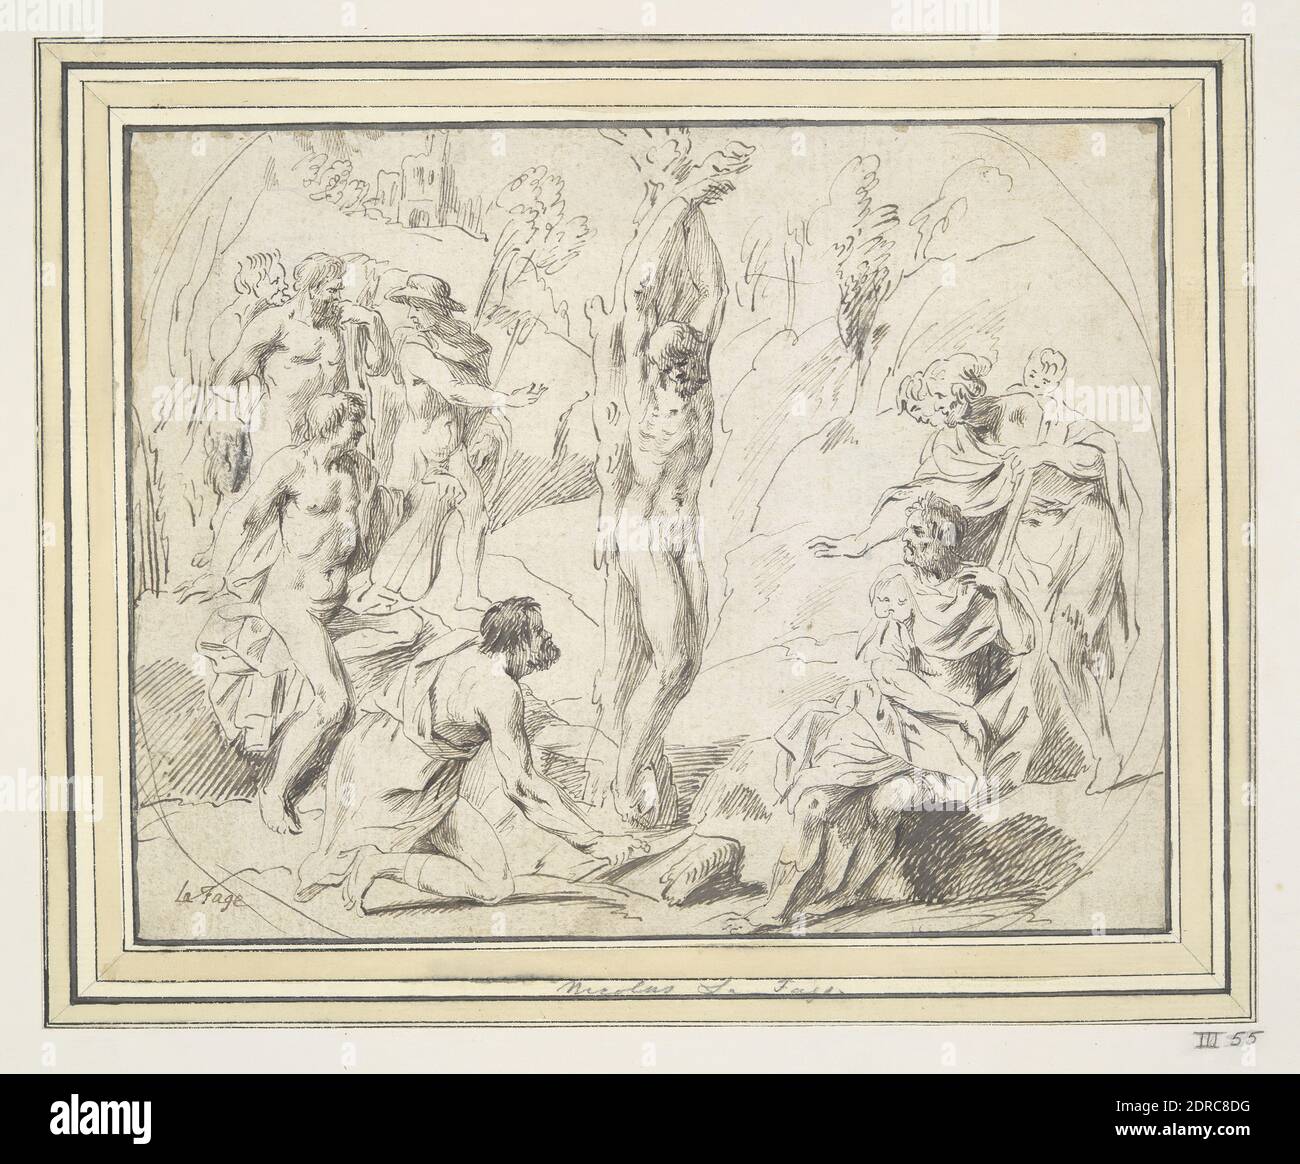 Artist: Raymond Lafage, French, 1656–1684, The Flaying of Marsyas, Pen and ink, Image: 15.2 × 19.4 cm (6 × 7 5/8in.), Made in France, French, 17th century, Works on Paper - Drawings and Watercolors Stock Photo